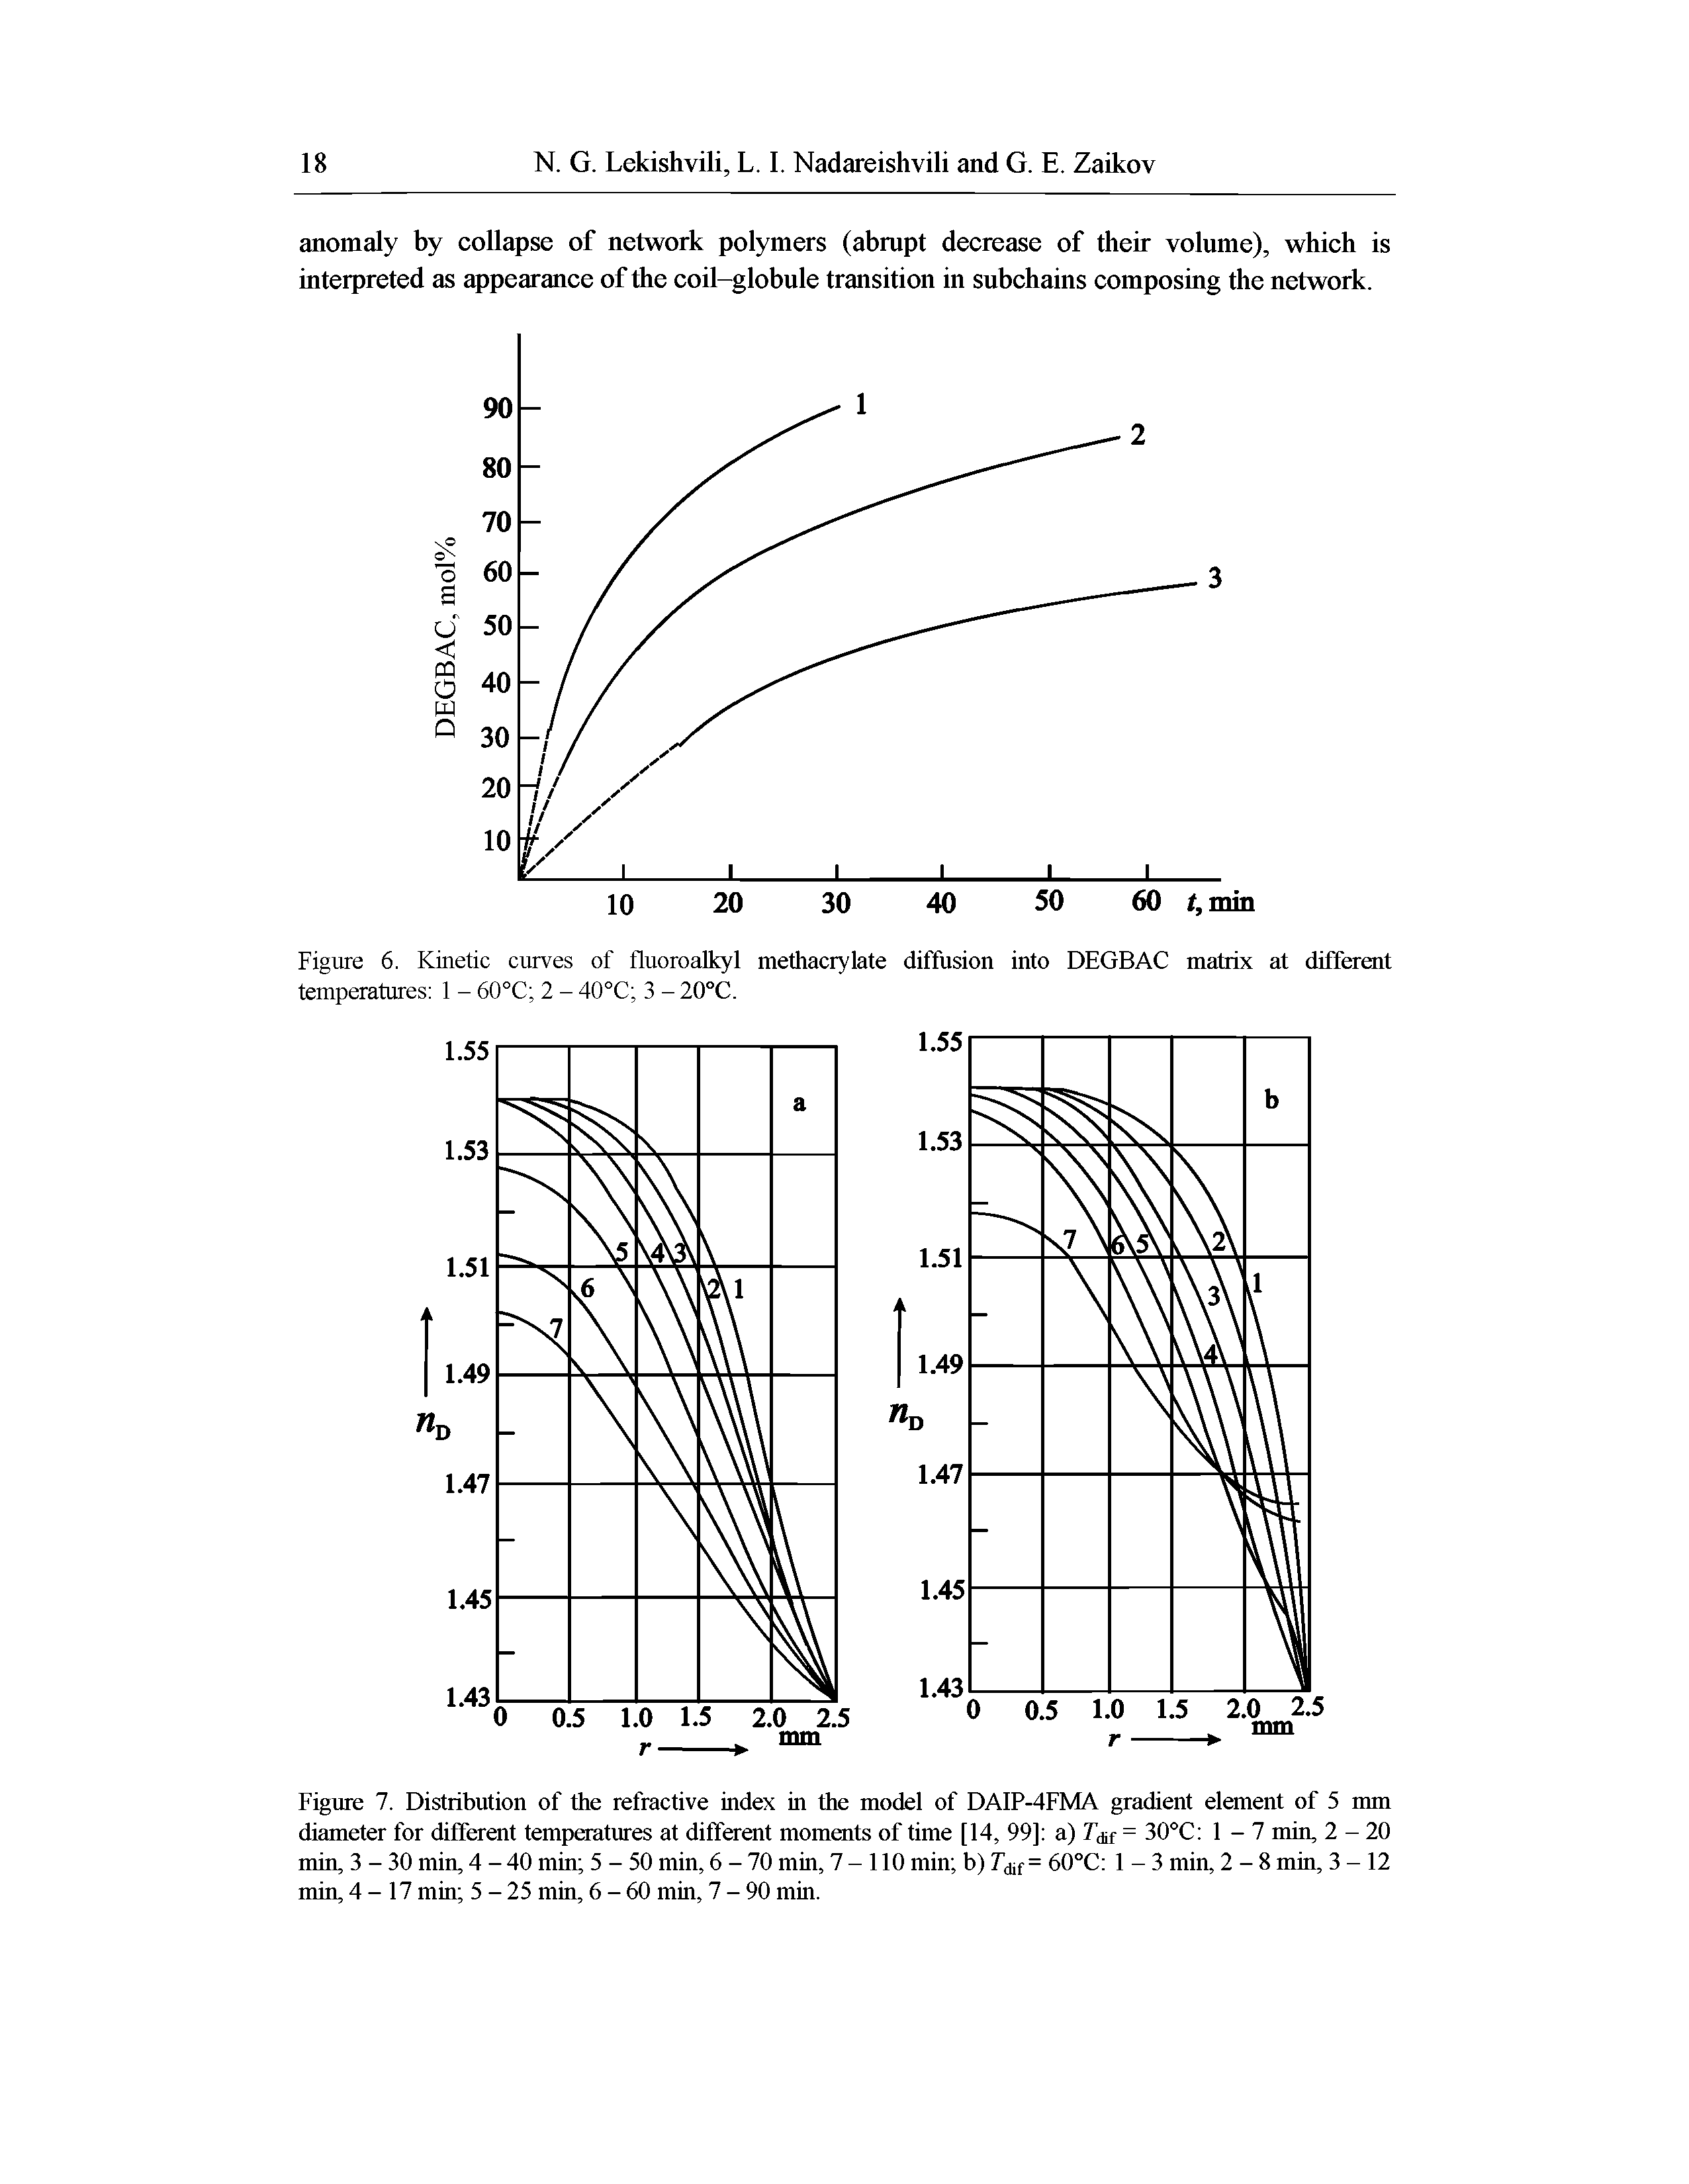 Figure 6. Kinetic curves of fluoroalkyl methacrylate diffusion into DEGBAC matrix at different temperatures 1 - 60°C 2 - 40°C 3 - 20°C.